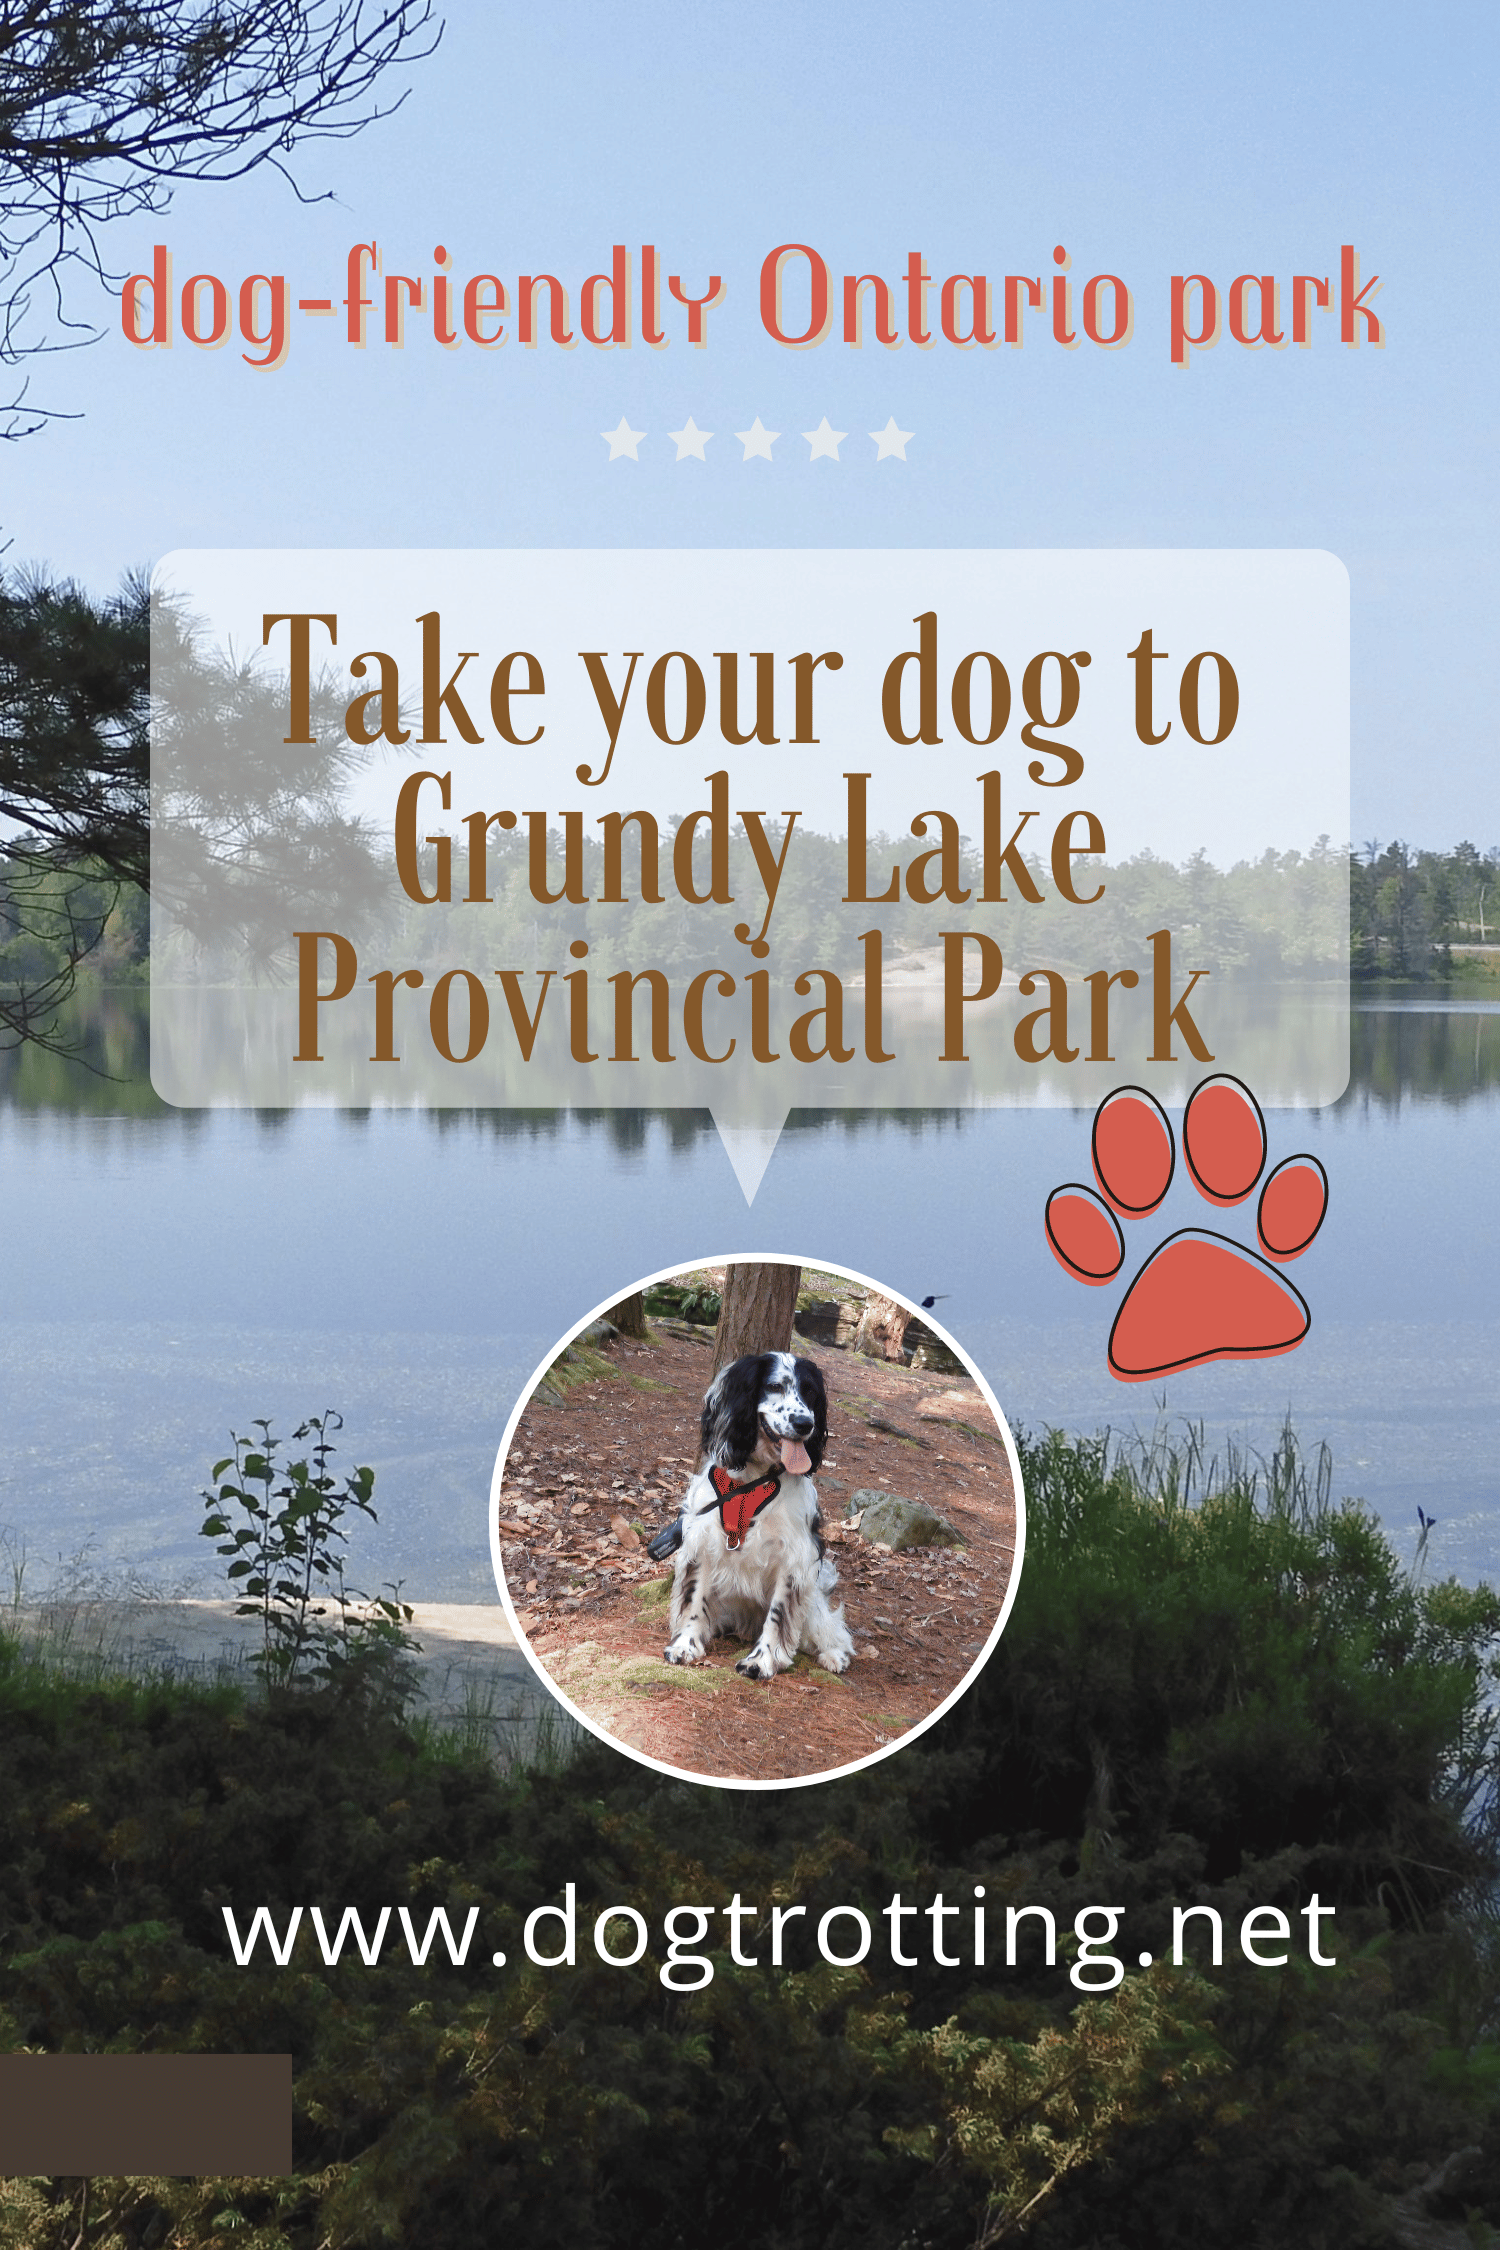 poster of Grundy Lake promoting dog-friendly Grundy Lake with small image of white and black dog